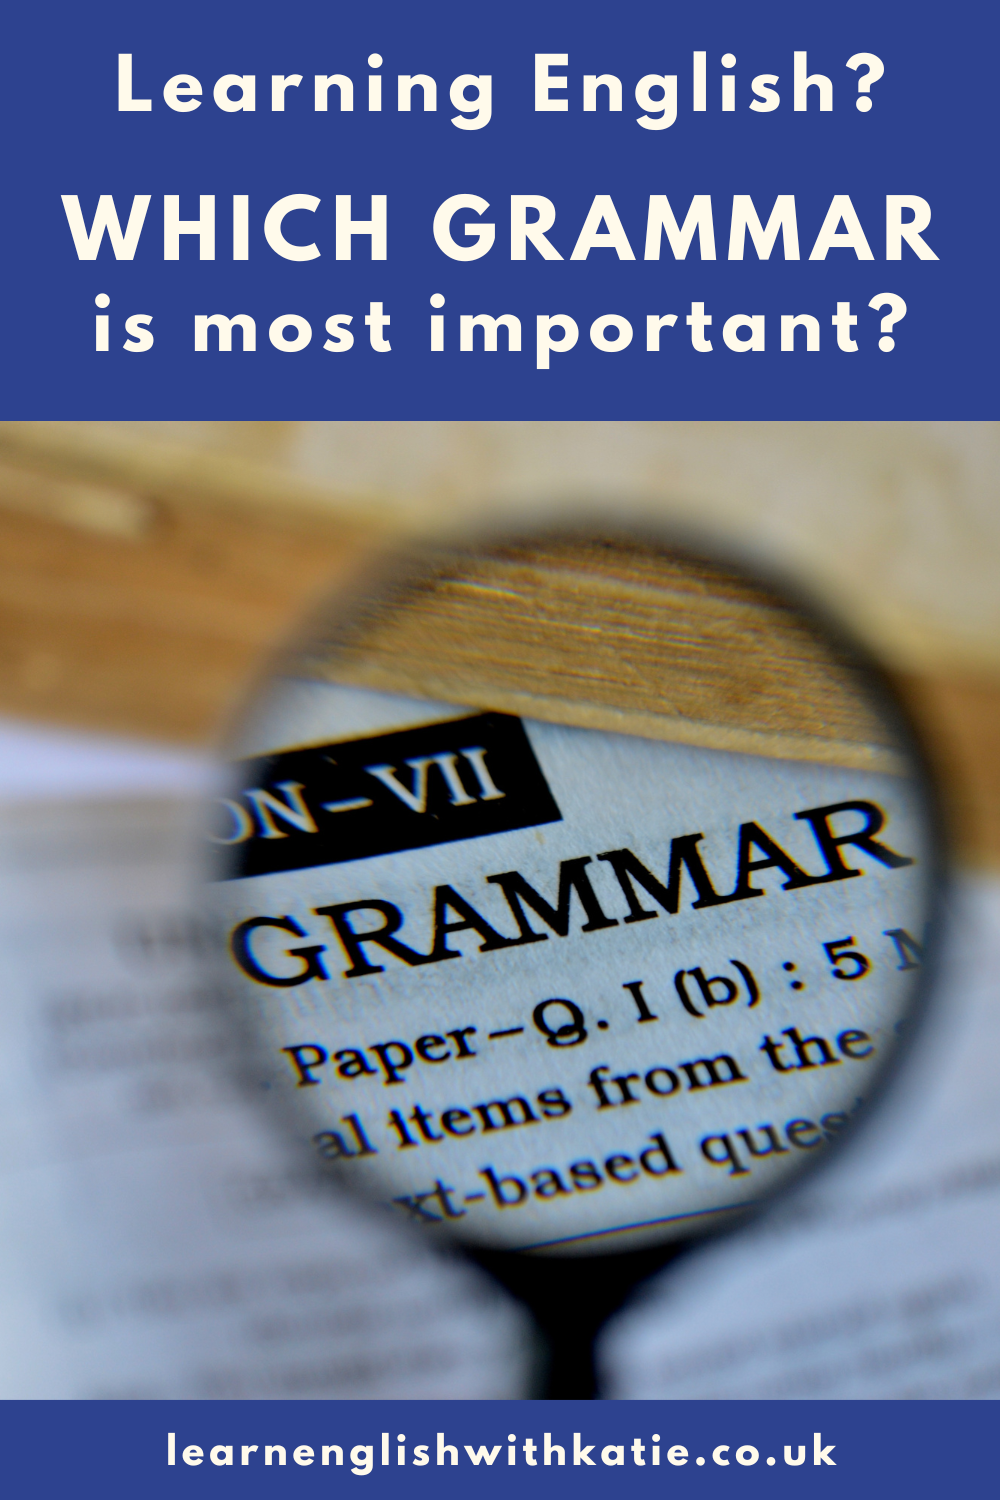 Piinterest pin showing a magnifying glass over the word grammar in a book.